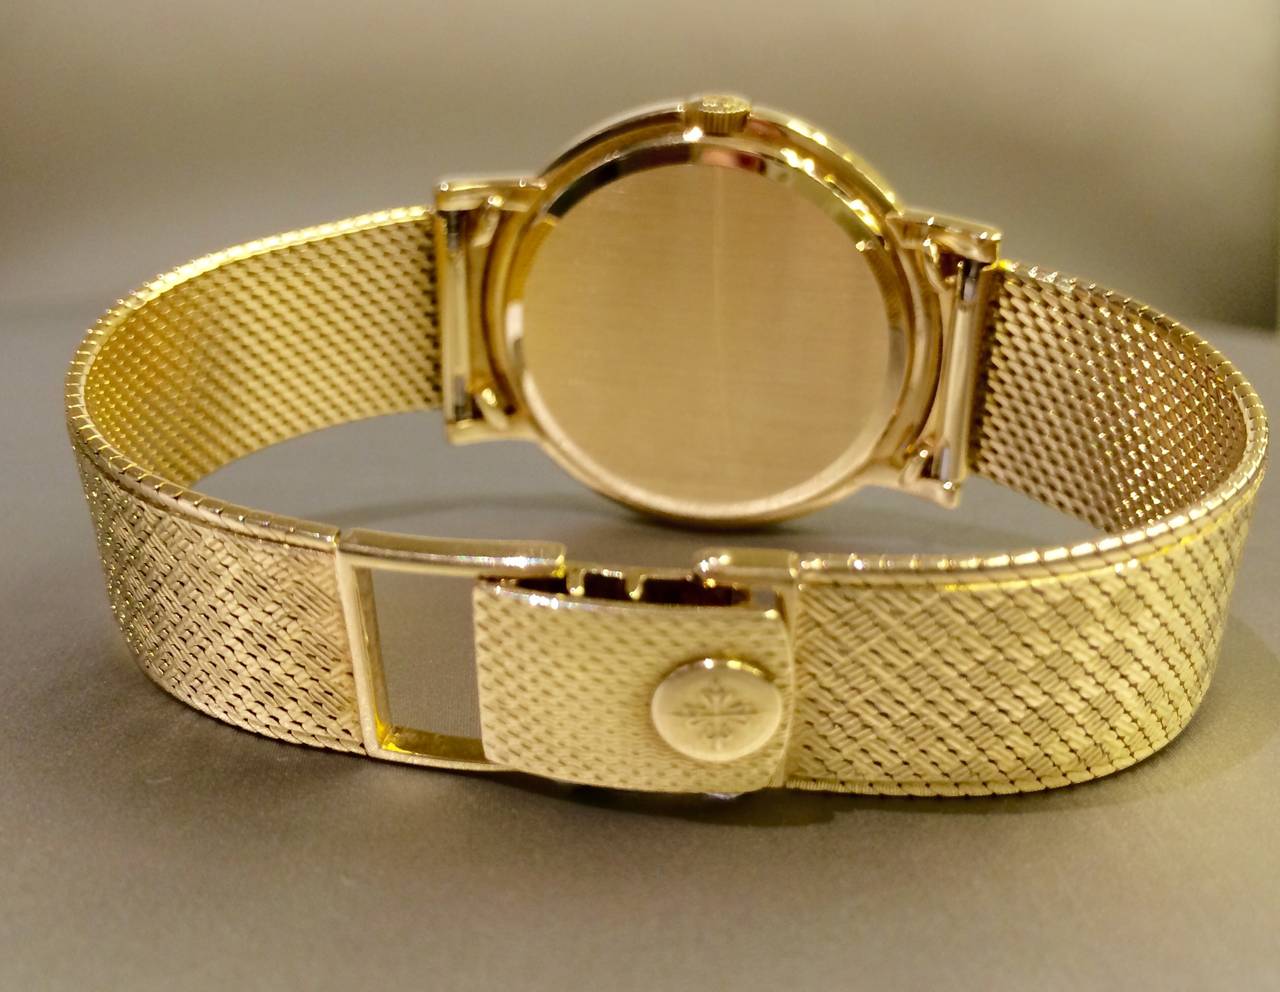 Patek Philippe Yellow Gold Patterned Dial Wristwatch Ref 2594 In Good Condition For Sale In Ottawa, Ontario